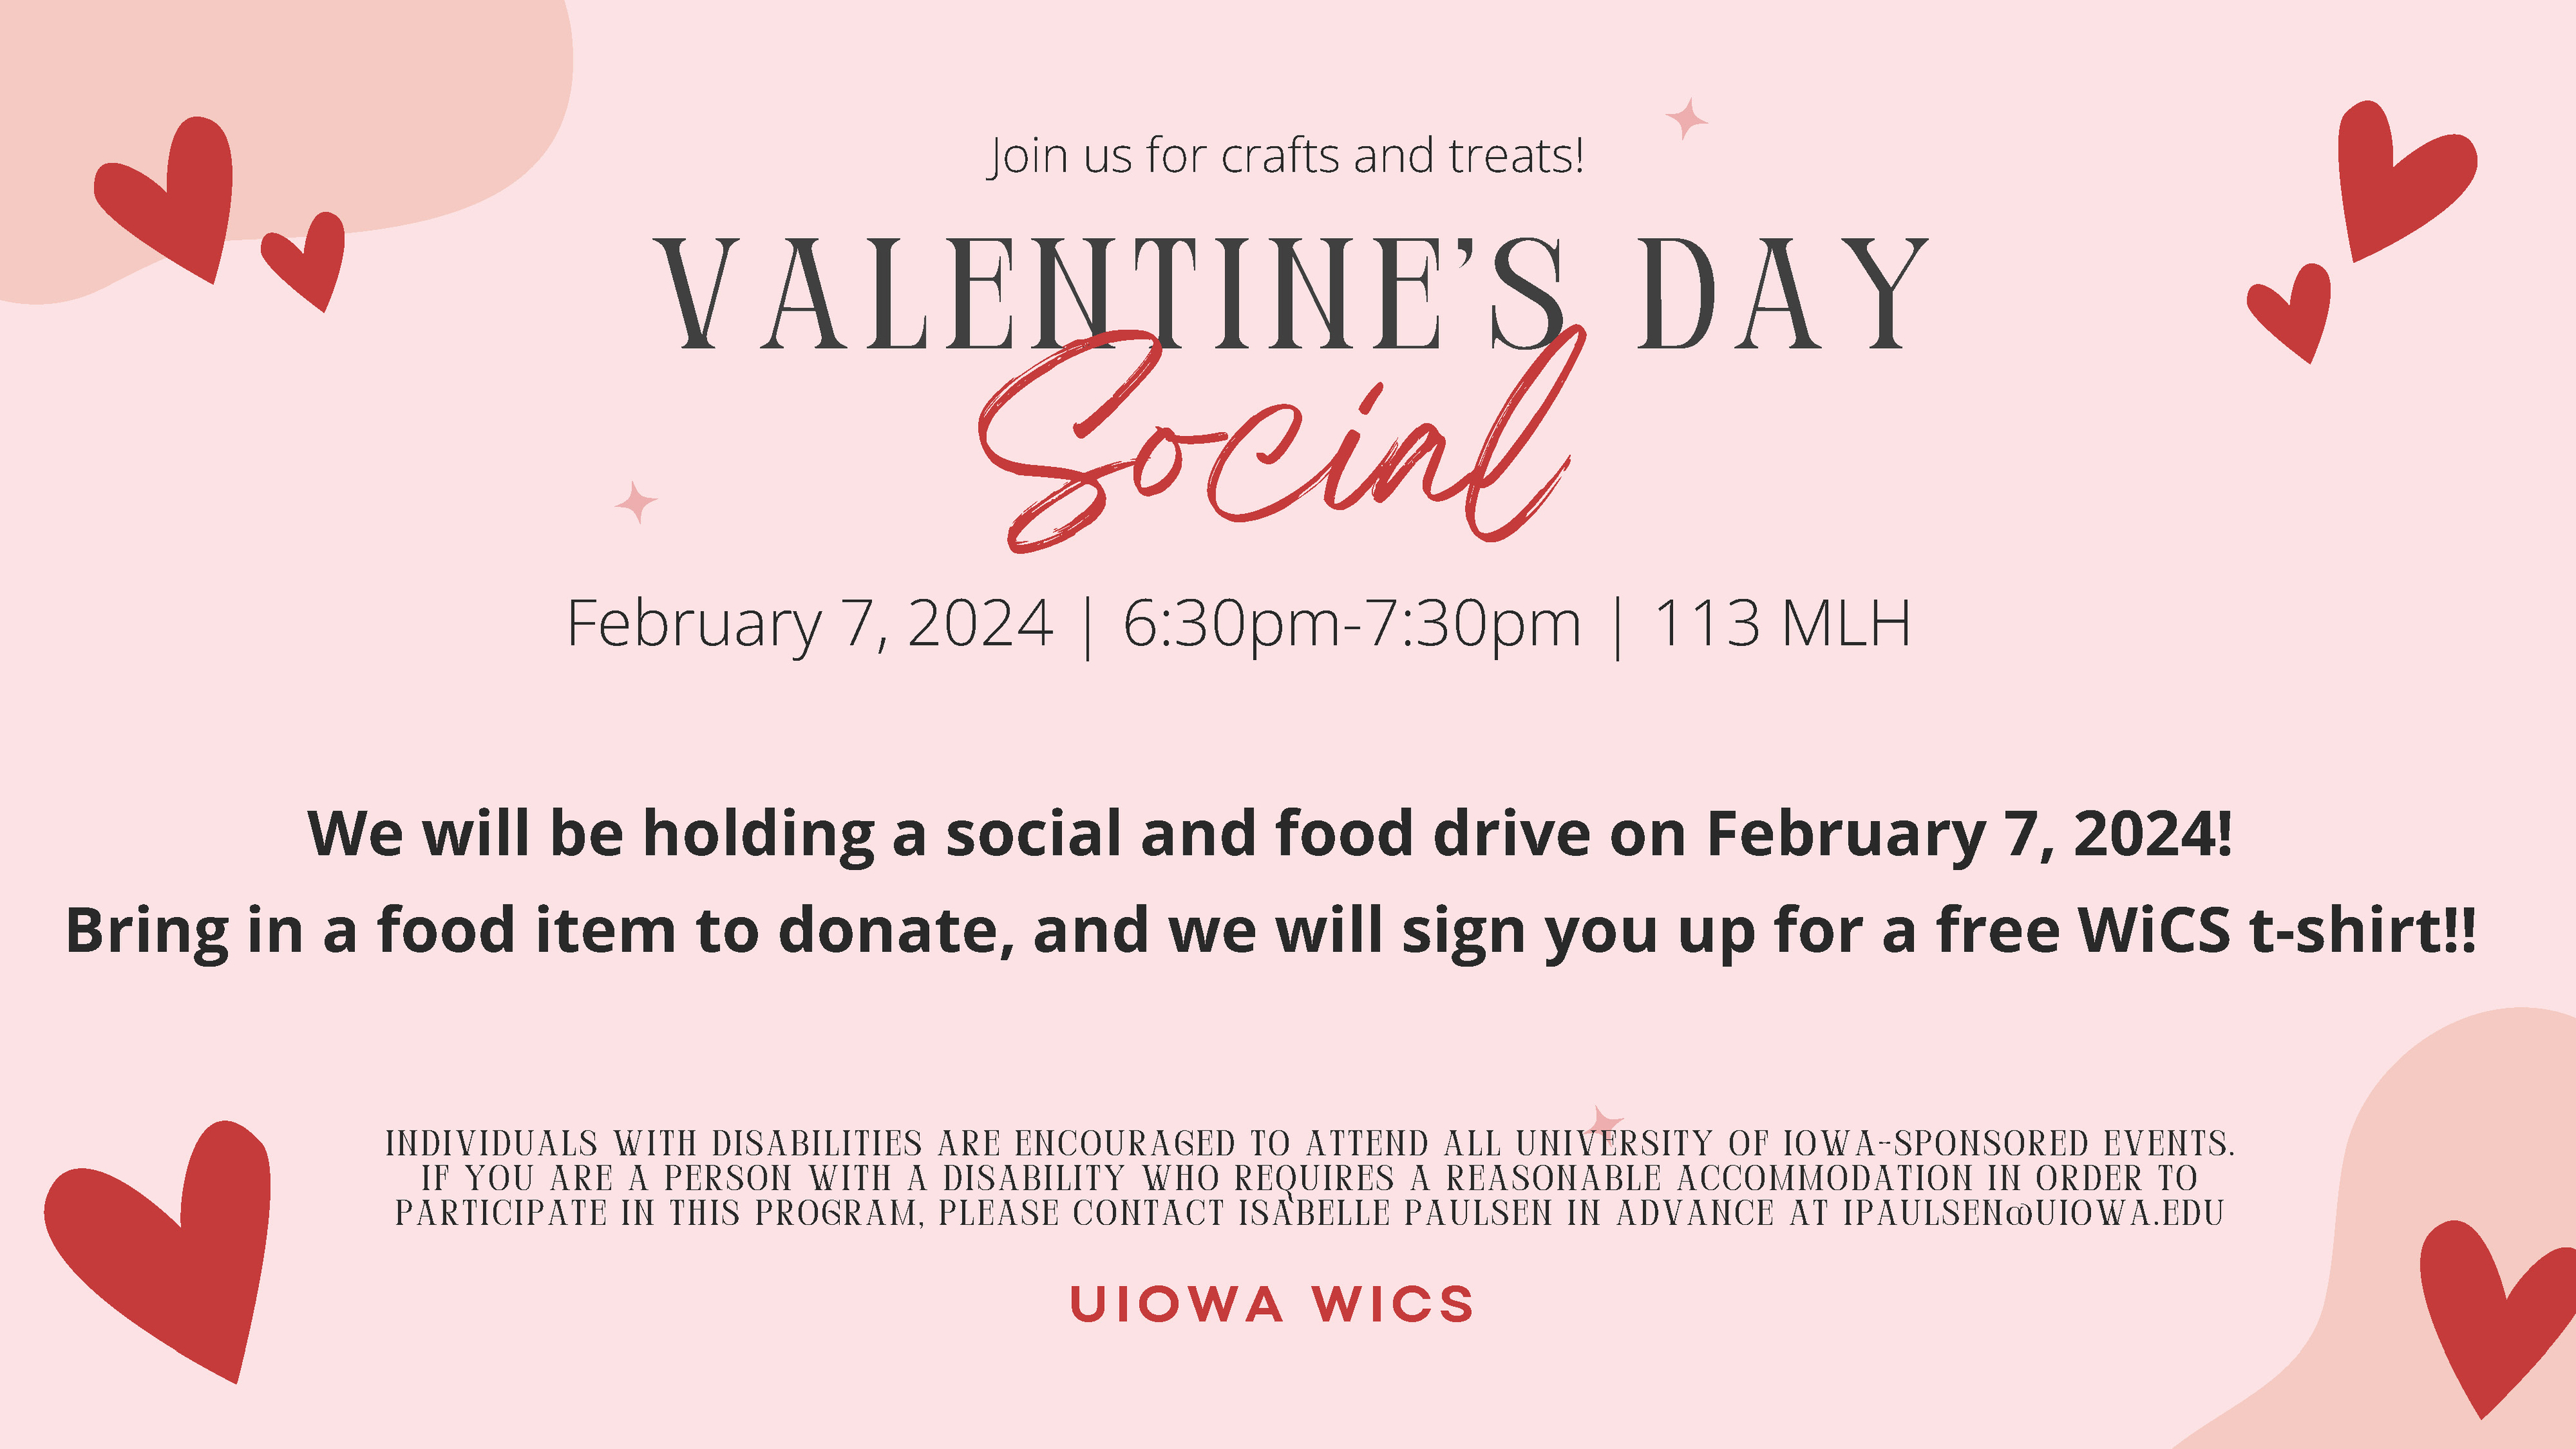 VALENTINE'S DAY Social UIOWA WICS We will be holding a social and food drive on February 7, 2024! Bring in a food item to donate, and we will sign you up for a free WiCS t-shirt!! February 7, 2024 | 6:30pm-7:30pm | 113 MLH INDIVIDUALS WITH DISABILITIES ARE ENCOURAGED TO ATTEND ALL UNIVERSITY OF IOWA-SPONSORED EVENTS. IF YOU ARE A PERSON WITH A DISABILITY WHO REQUIRES A REASONABLE ACCOMMODATION IN ORDER TO PARTICIPATE IN THIS PROGRAM, PLEASE CONTACT ISABELLE PAULSEN IN ADVANCE AT IPAULSEN@UIOWA.EDU Join us for crafts and treats!